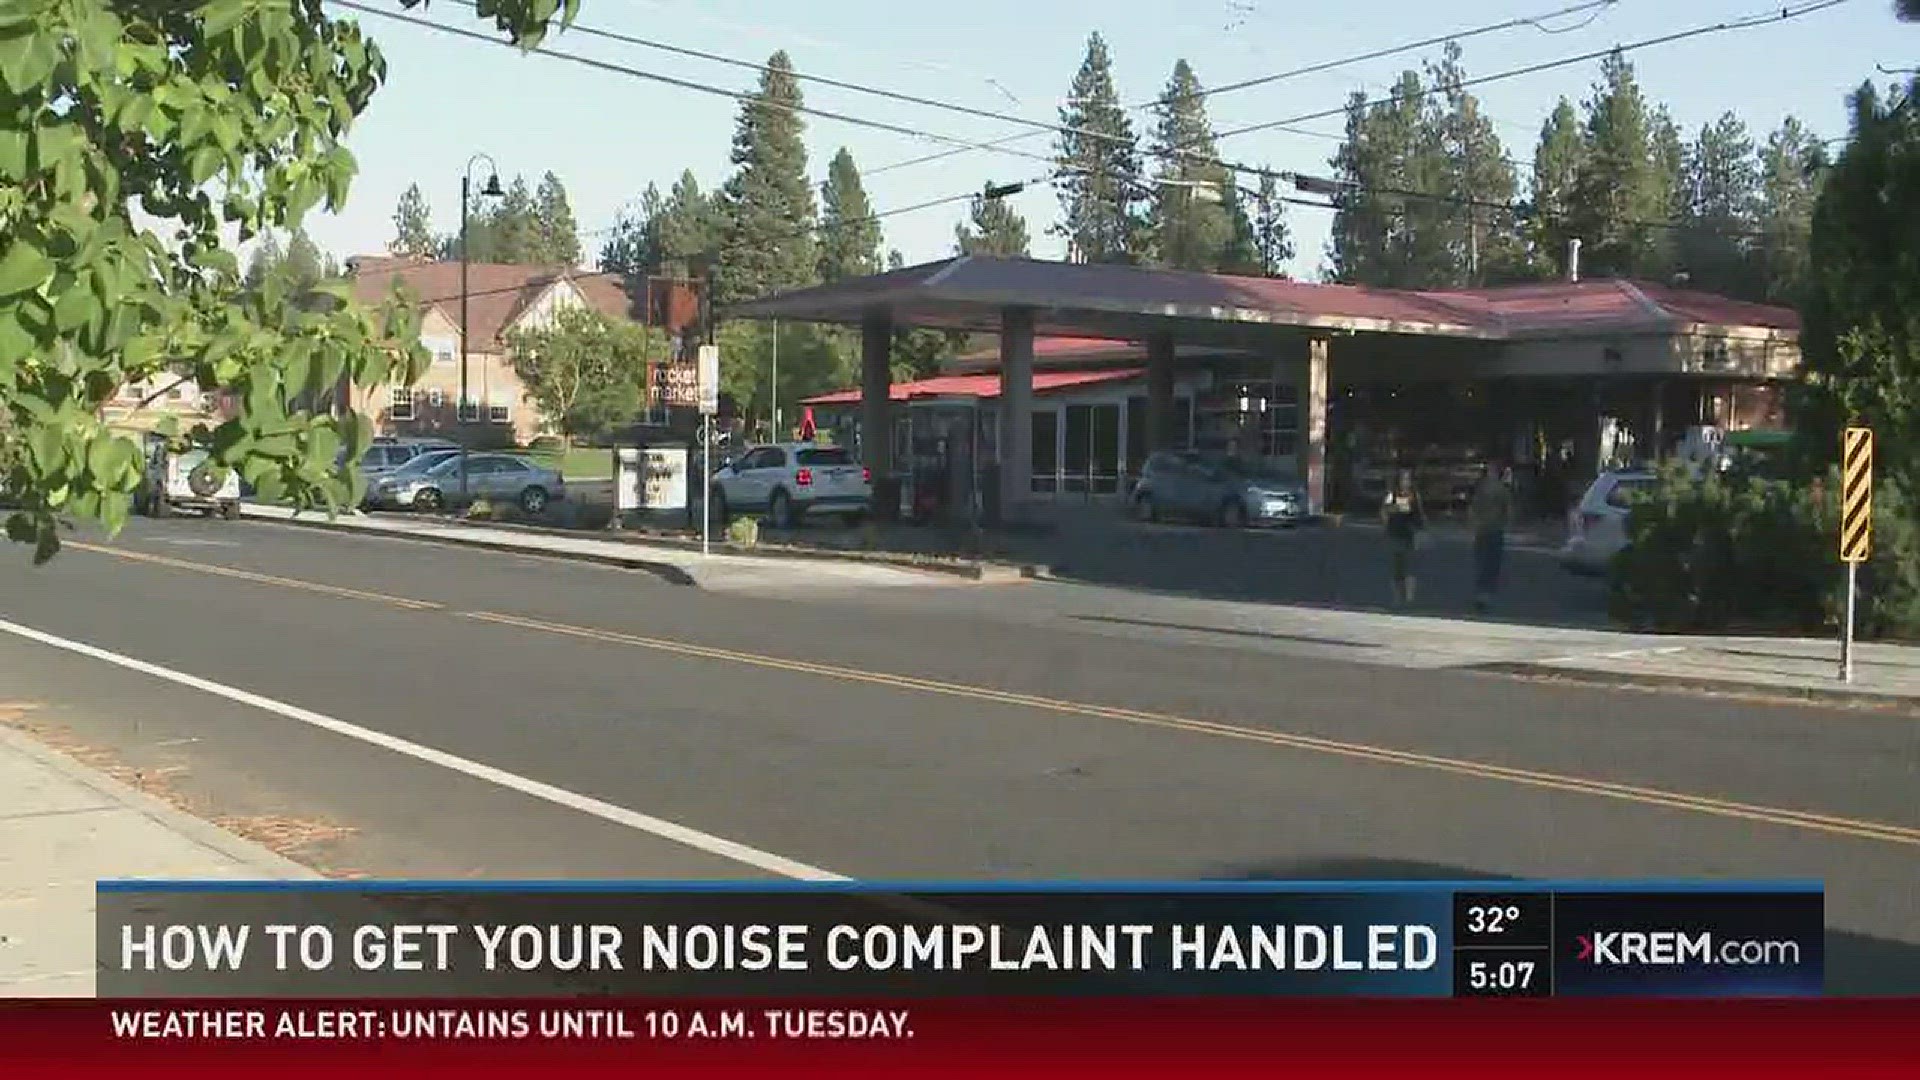 How to get your noise complaint handled